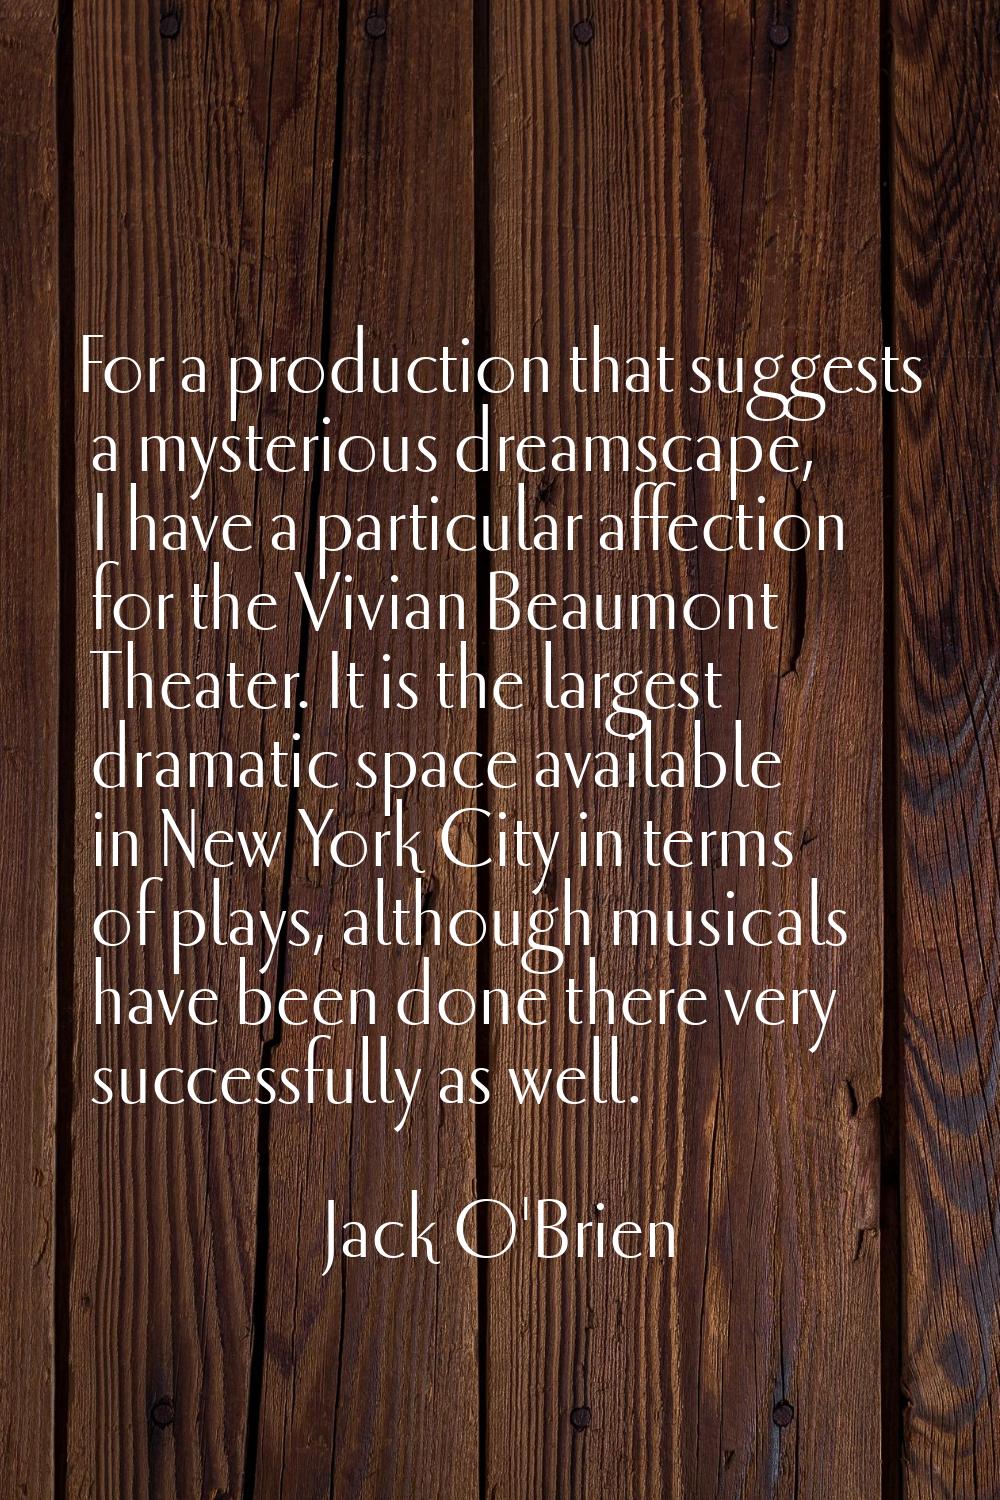 For a production that suggests a mysterious dreamscape, I have a particular affection for the Vivia